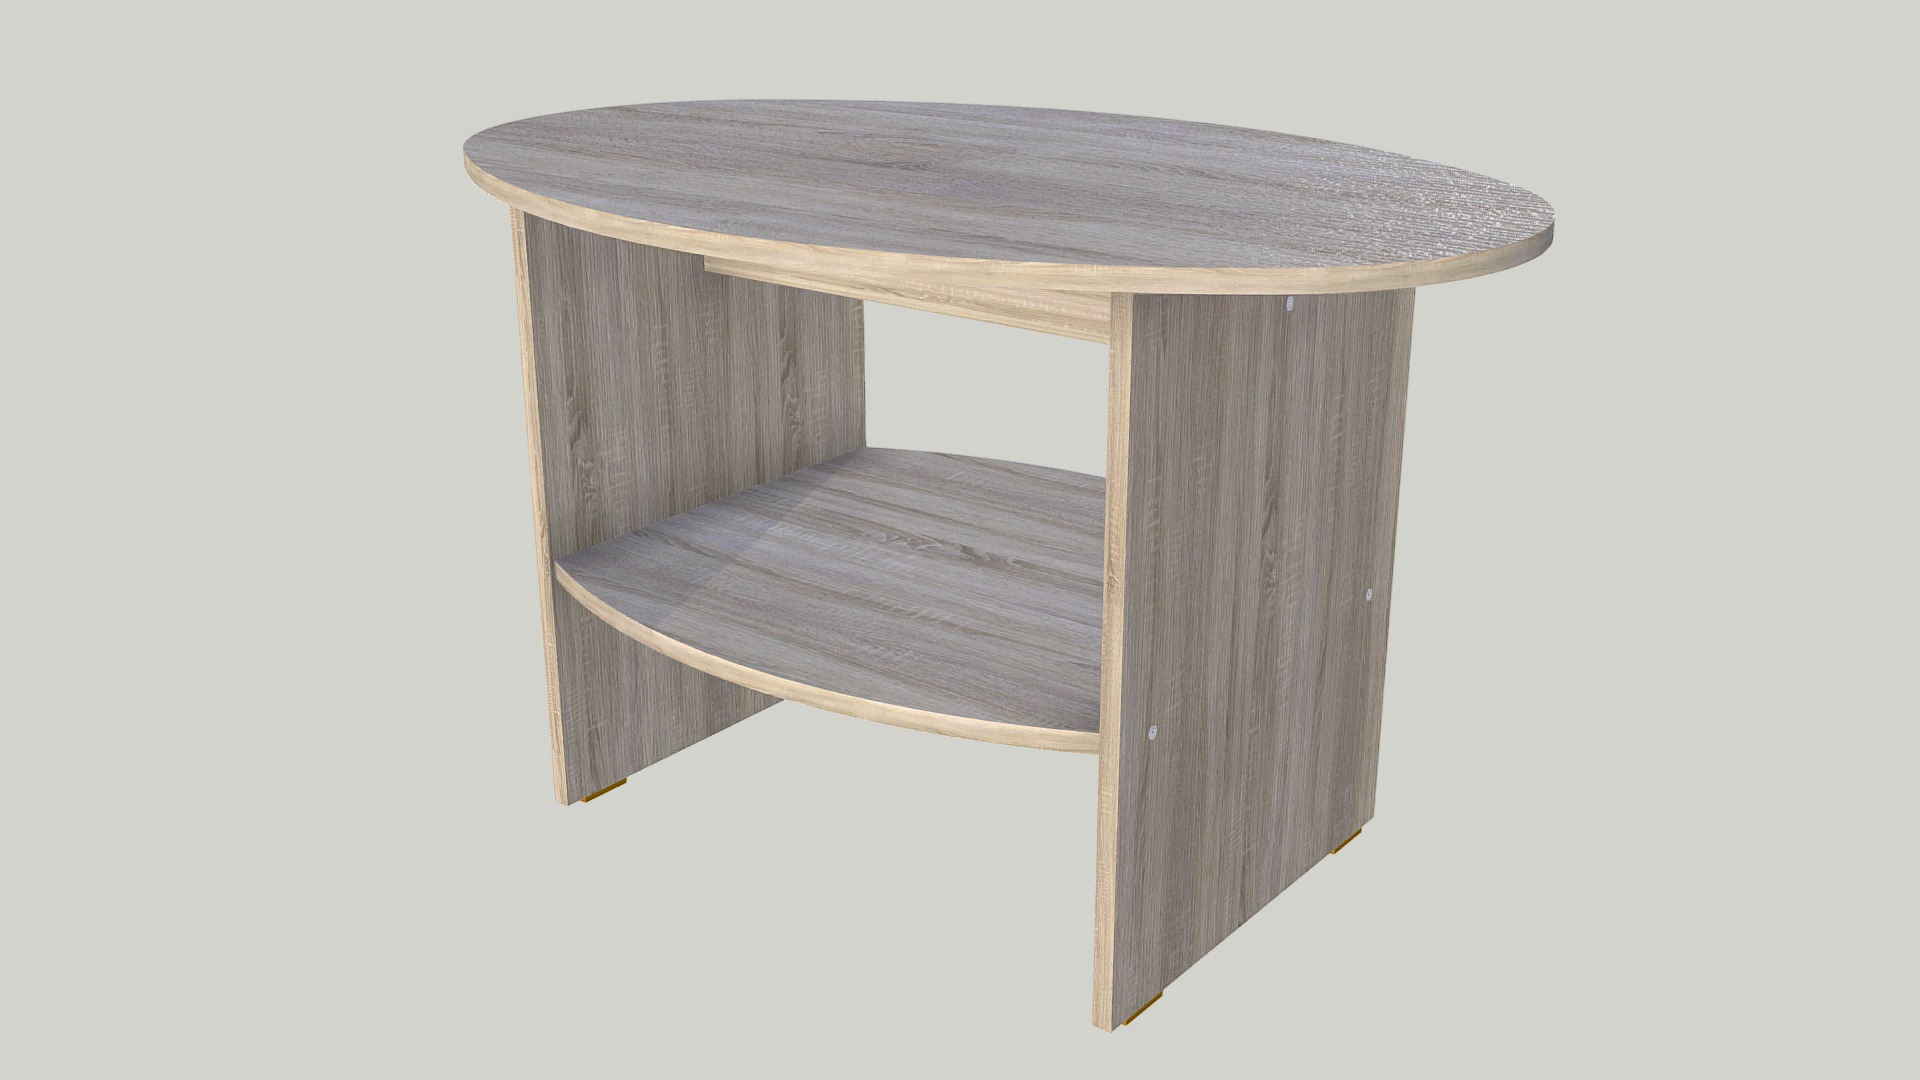 3D model Журнальный столик "Уют" - This is a 3D model of the Журнальный столик "Уют". The 3D model is about a wooden table with a white background.